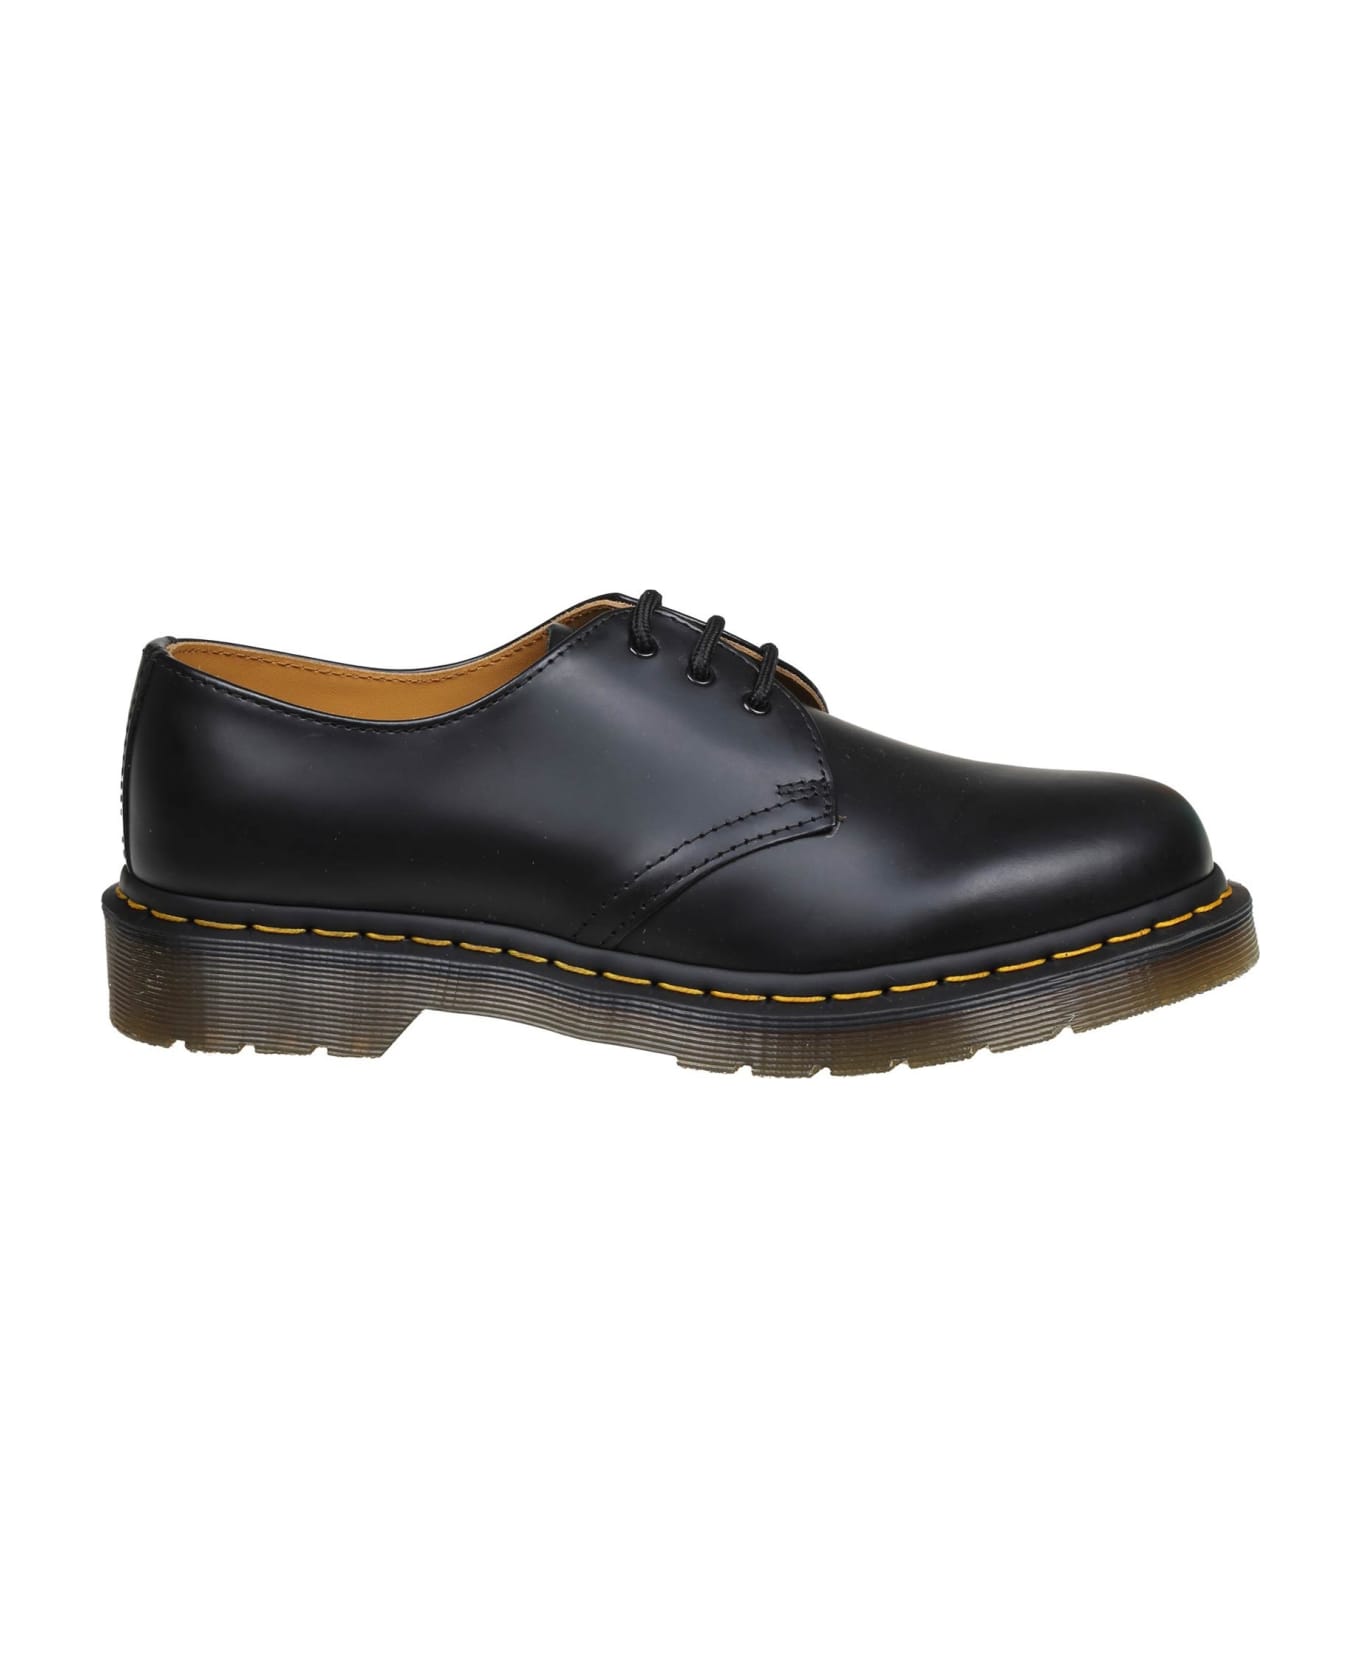 Dr. Martens 1461 Lace-up Shoe In Black Leather